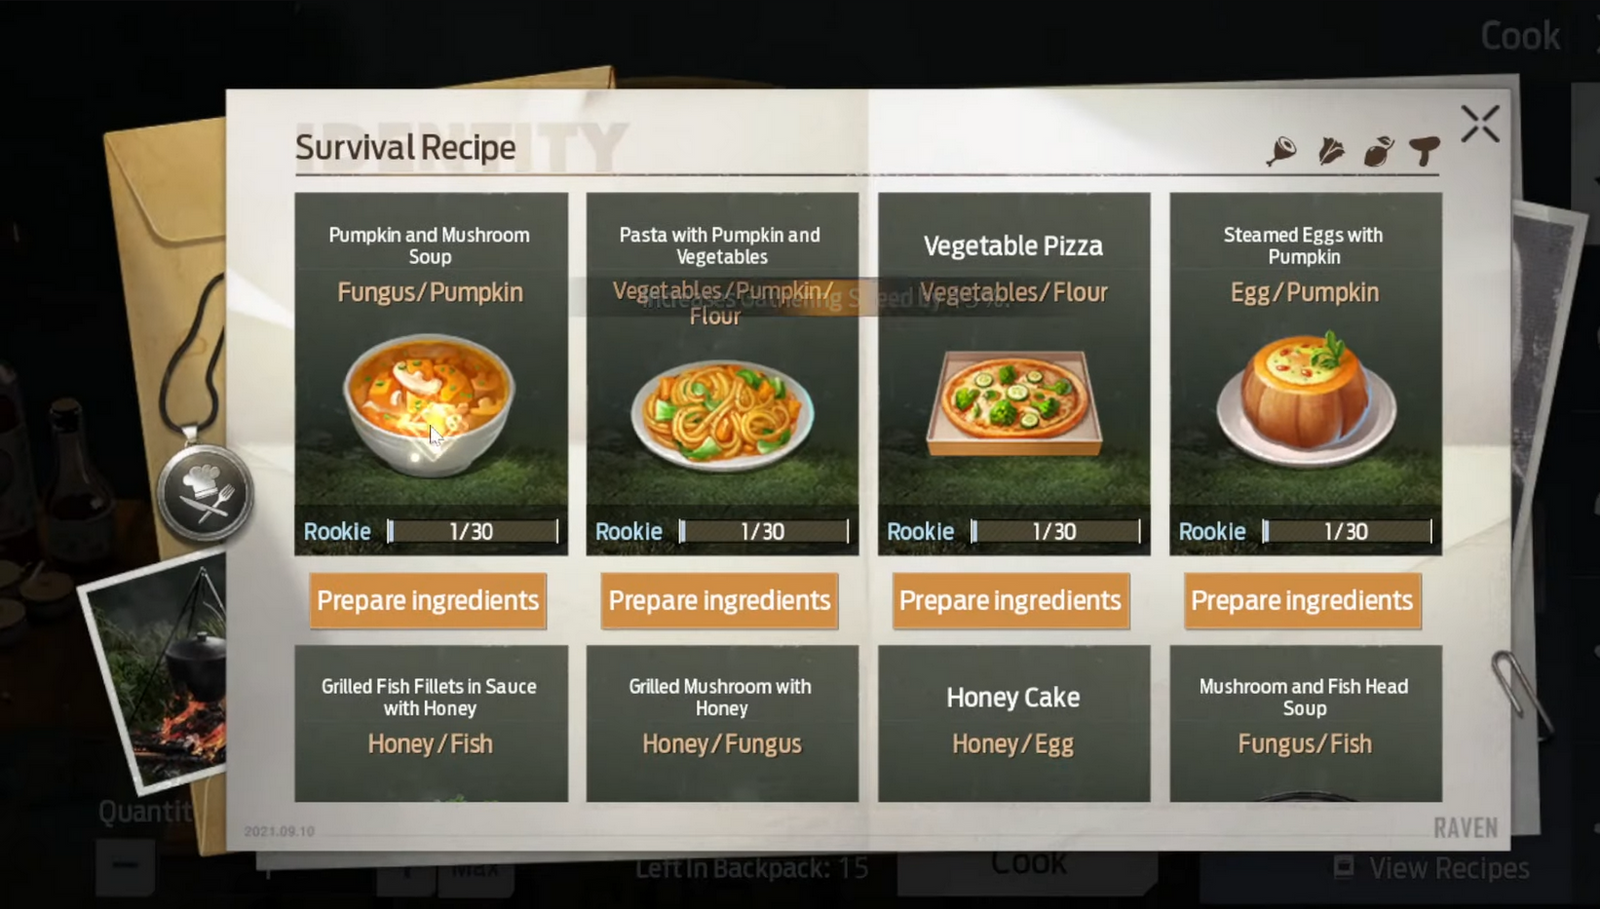 Survival Recipes in Undawn best cooking buffs